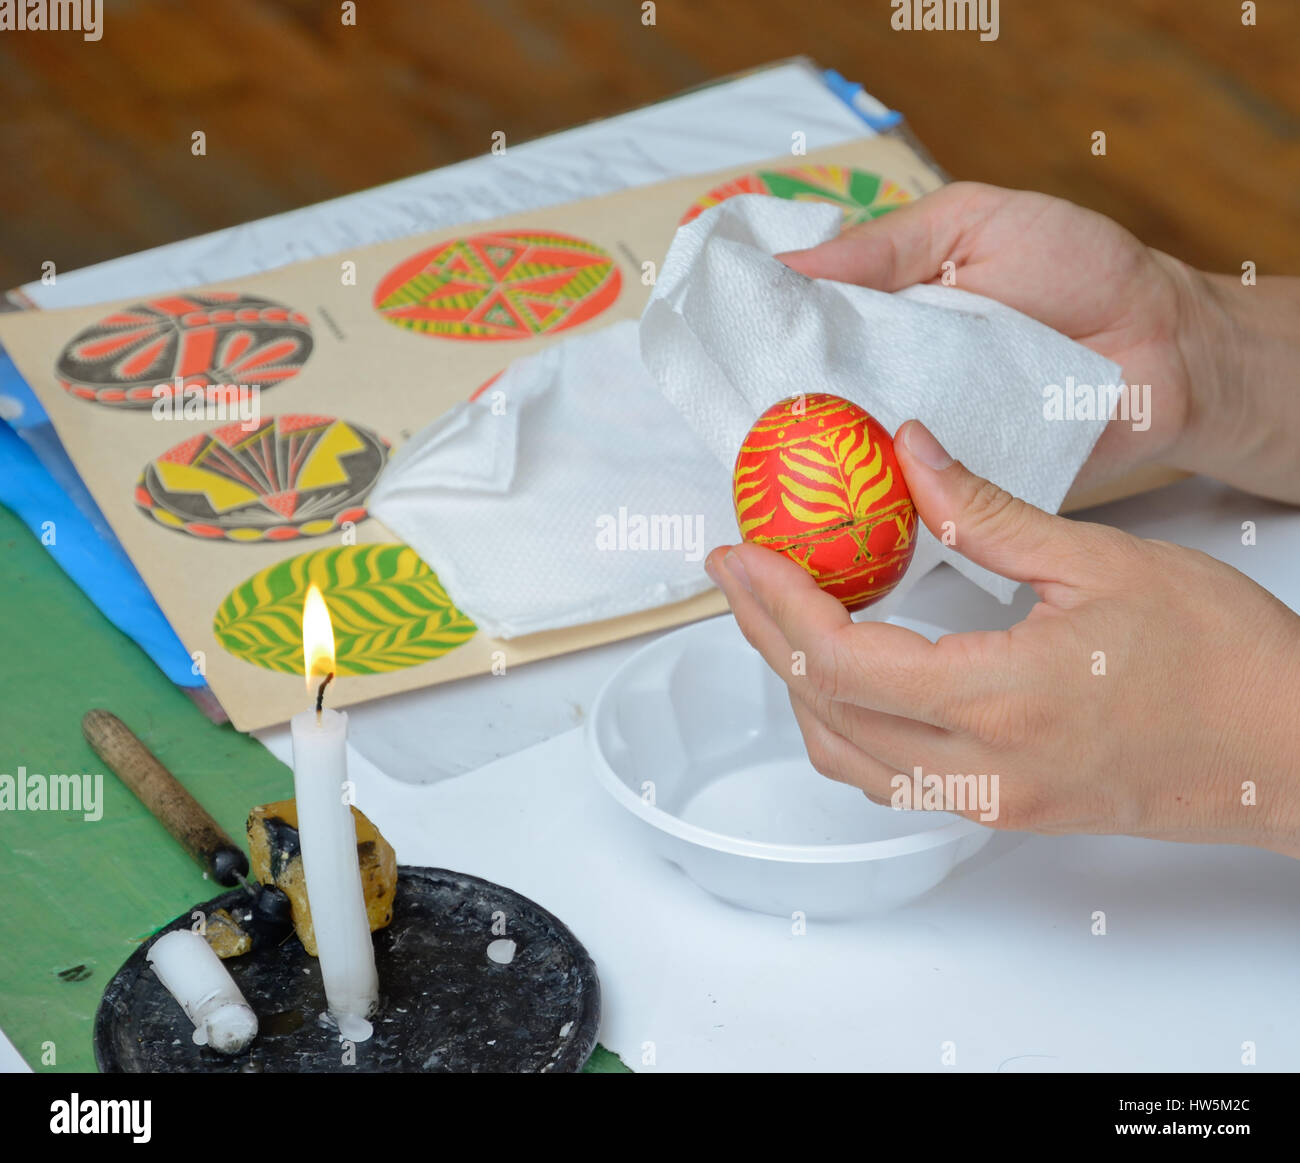 The human hands are wiping the ready painted egg near the candle burning. The Easter egg is decorated with a pattern using a wax-resist method. Stock Photo